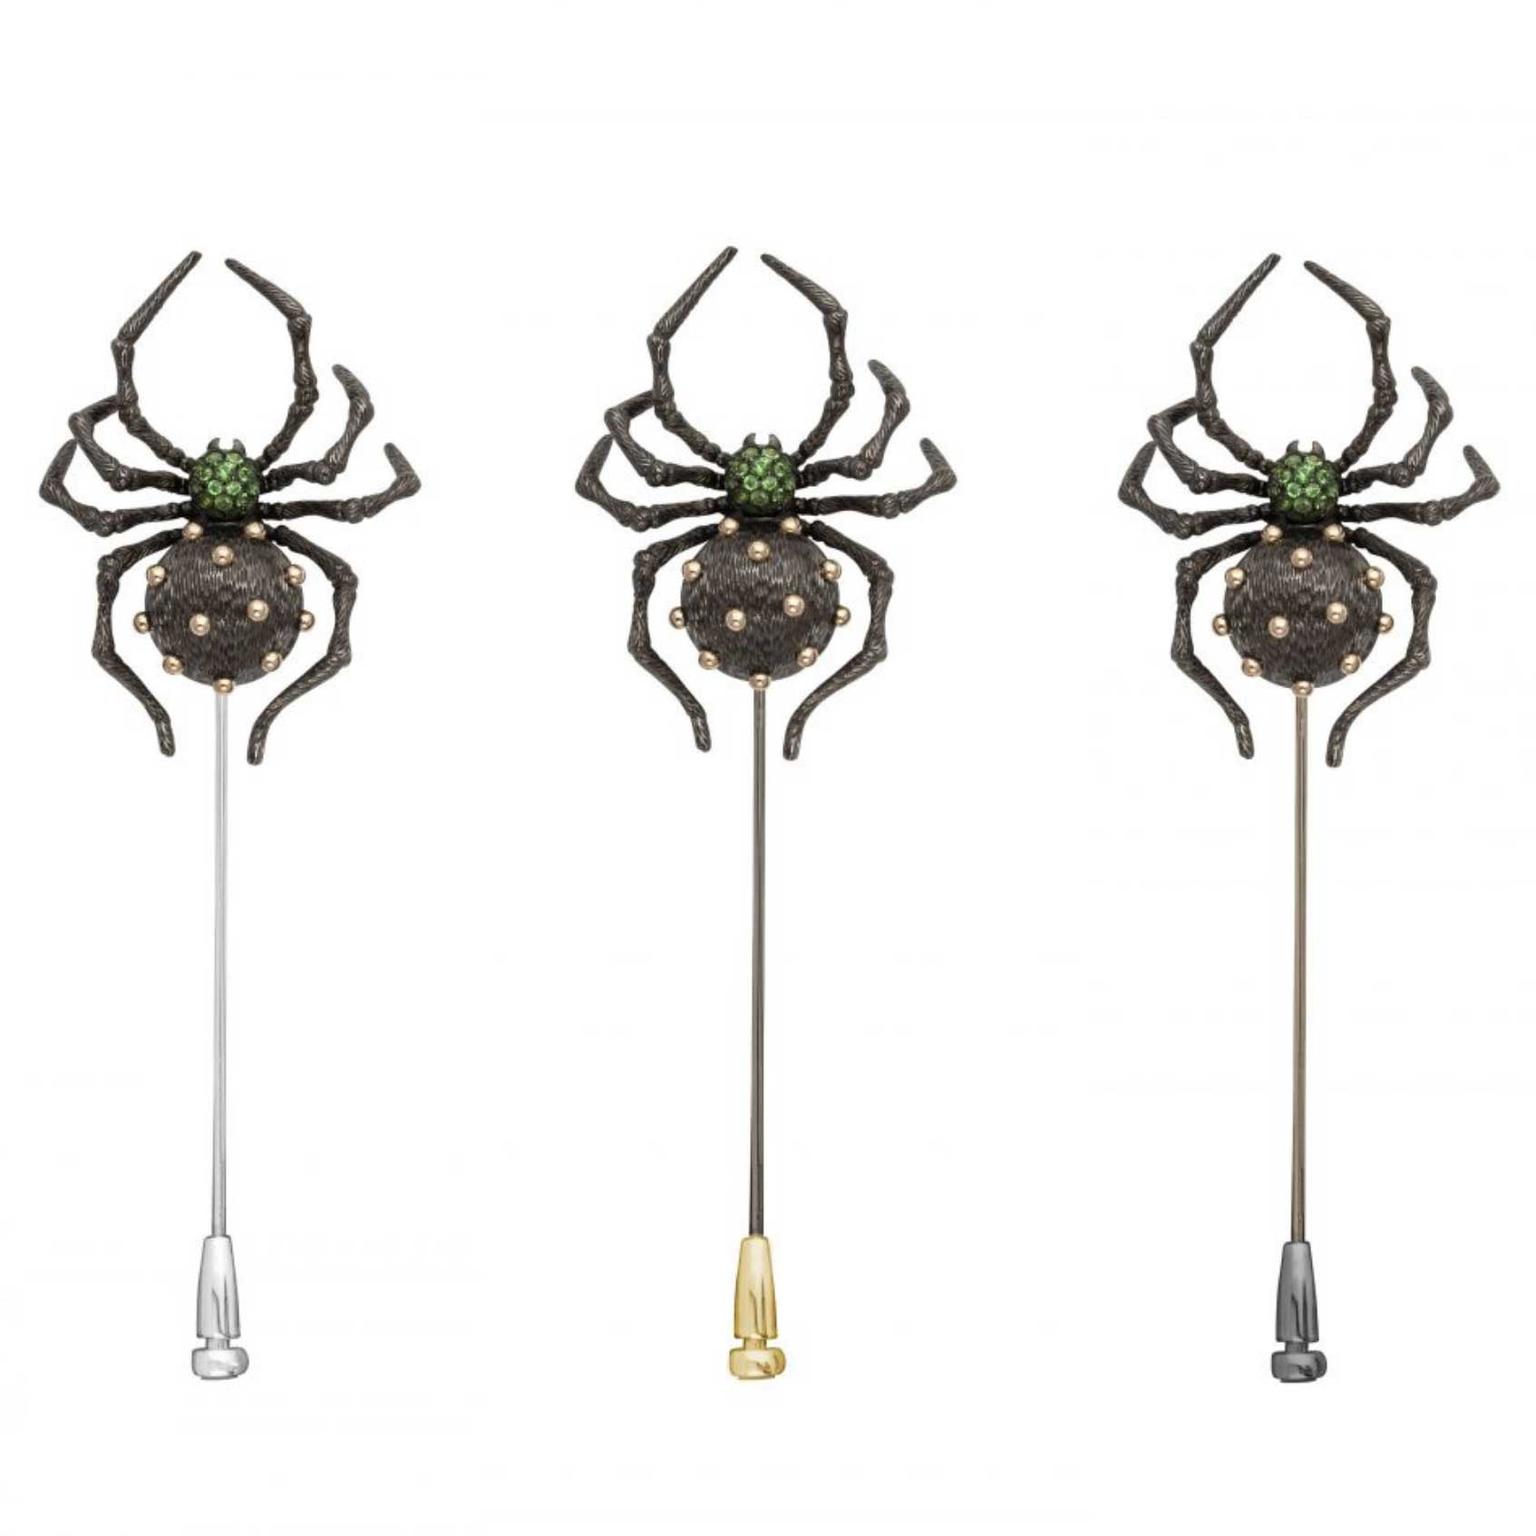 Boo! We have the best spider jewels for you